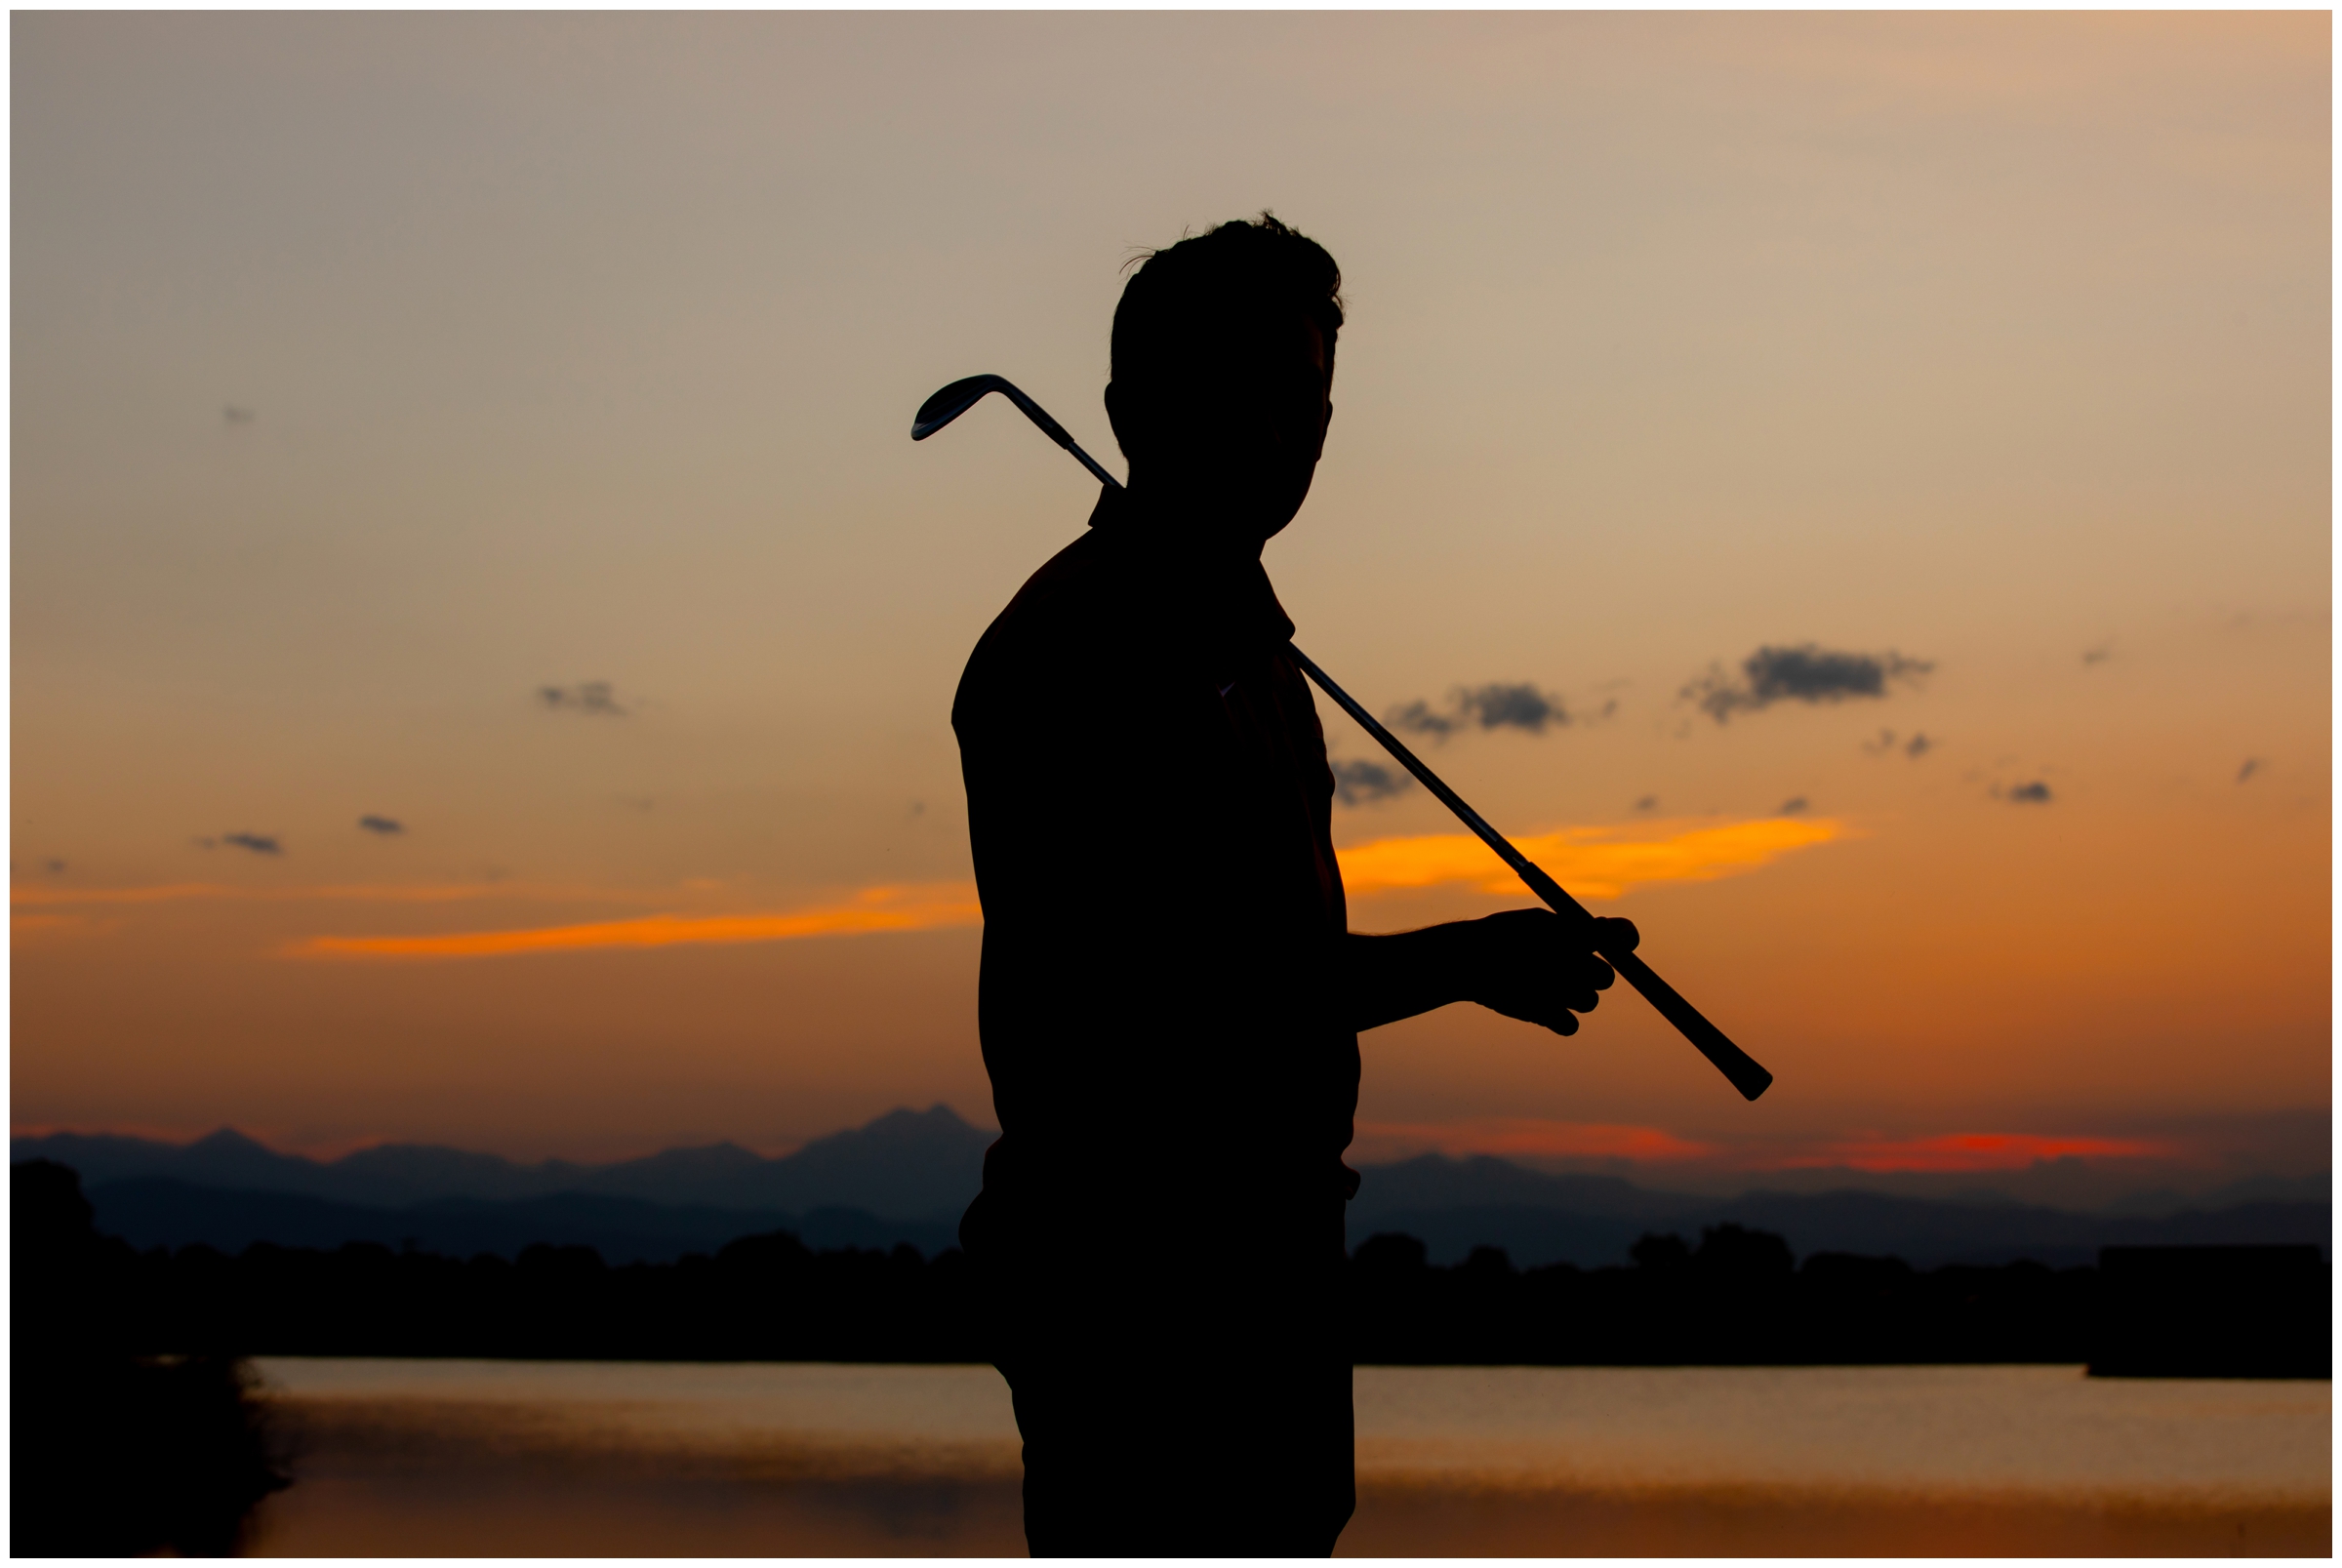 unique golf silhouette senior photography inspiration by Plum Pretty Photography 